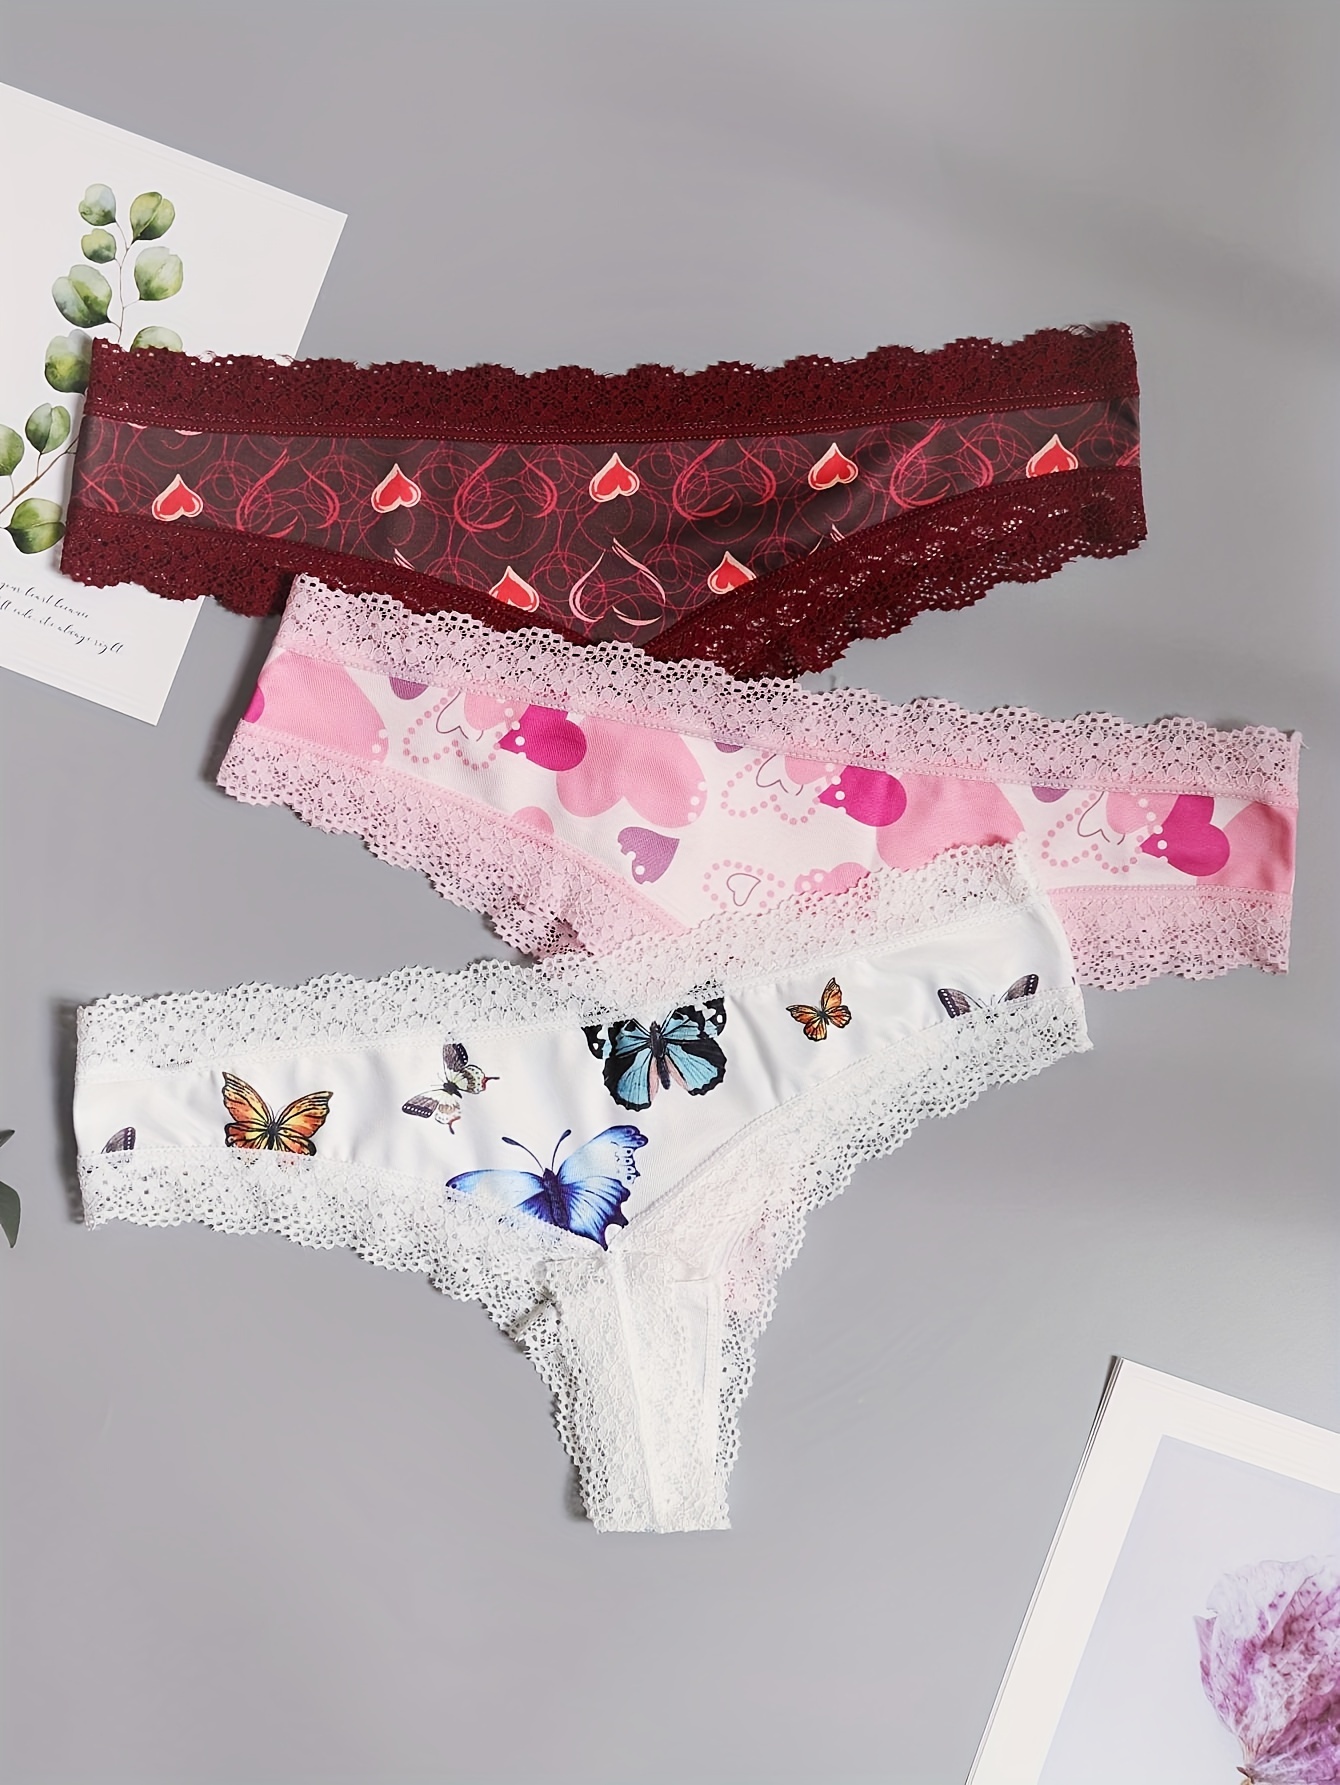 Personalize Your Own Plus Size Mini Hearts Cotton Full Brief Panties FAST  SHIPPING Valentines Panties, Plus Sizes X, 1X, 2X, 3X, 4X, 5X 